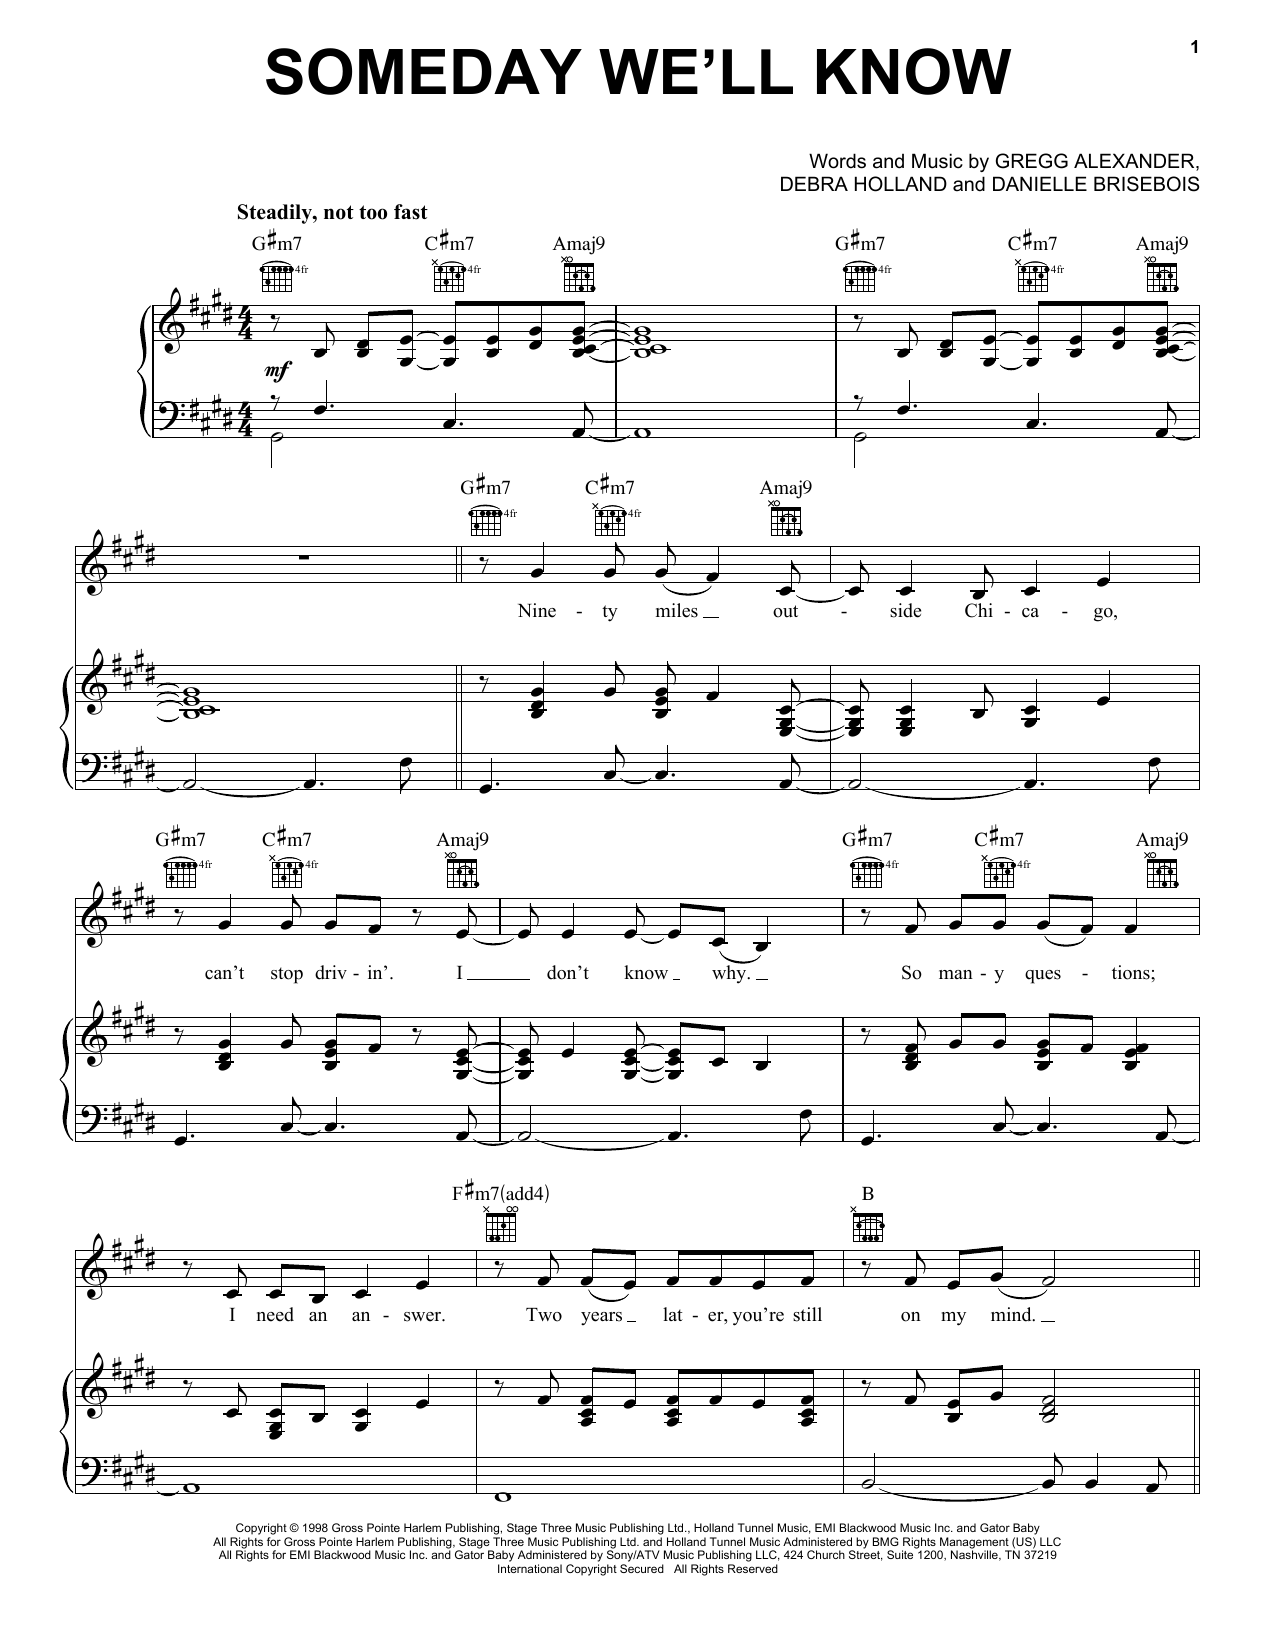 Download New Radicals Someday We'll Know Sheet Music